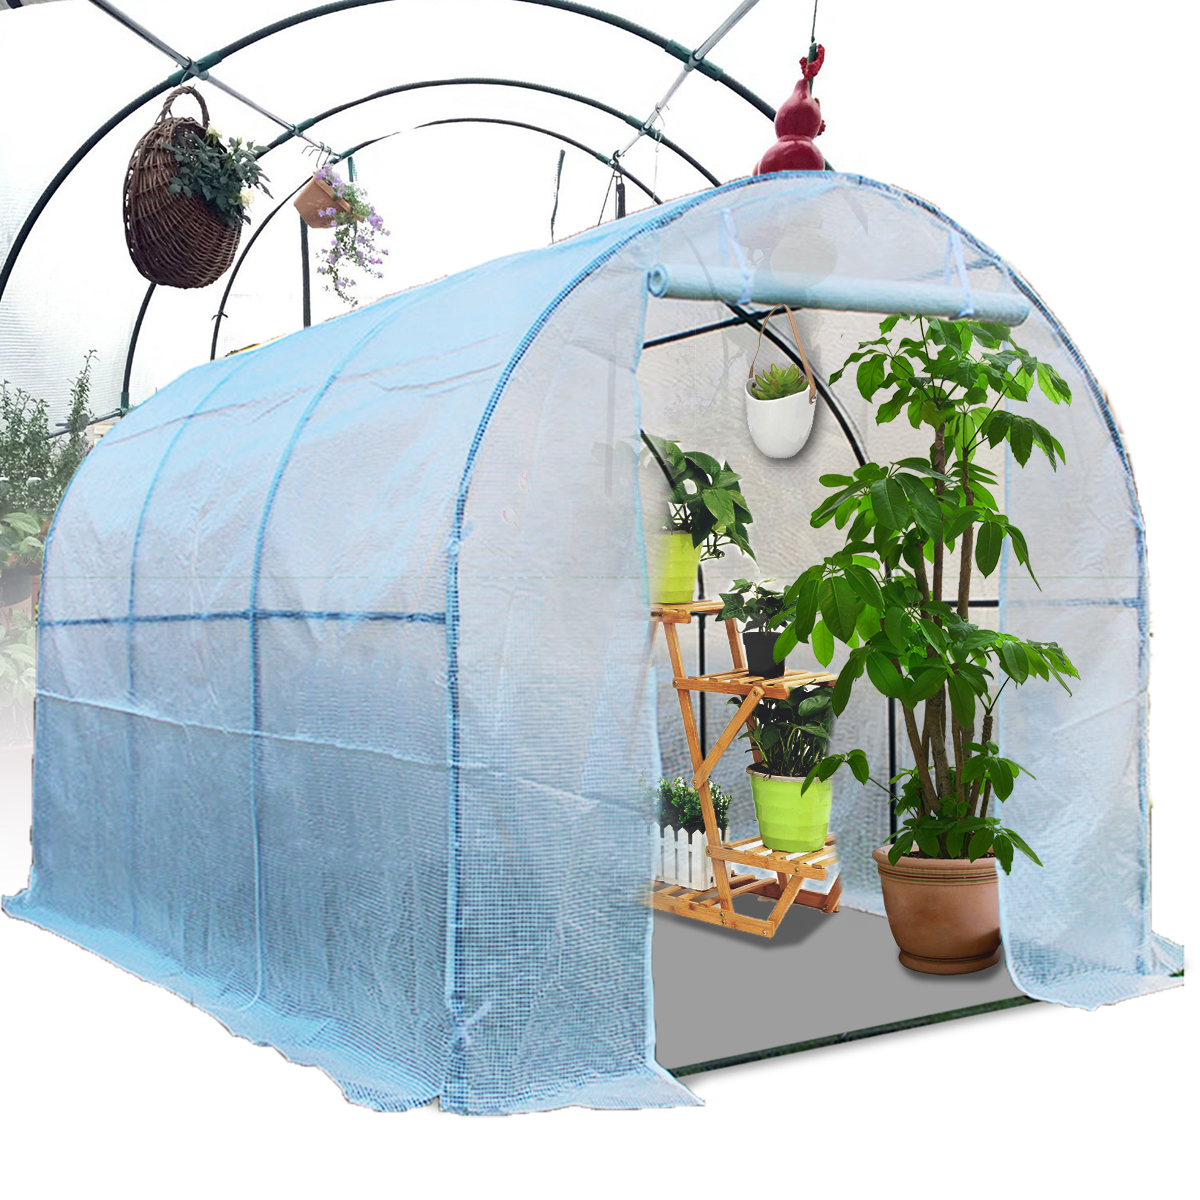 3X2X2M-Greenhouse-Planter-House-Canopy-Outdoor-Plant-Garden-Grow-Growing-House-1938344-3